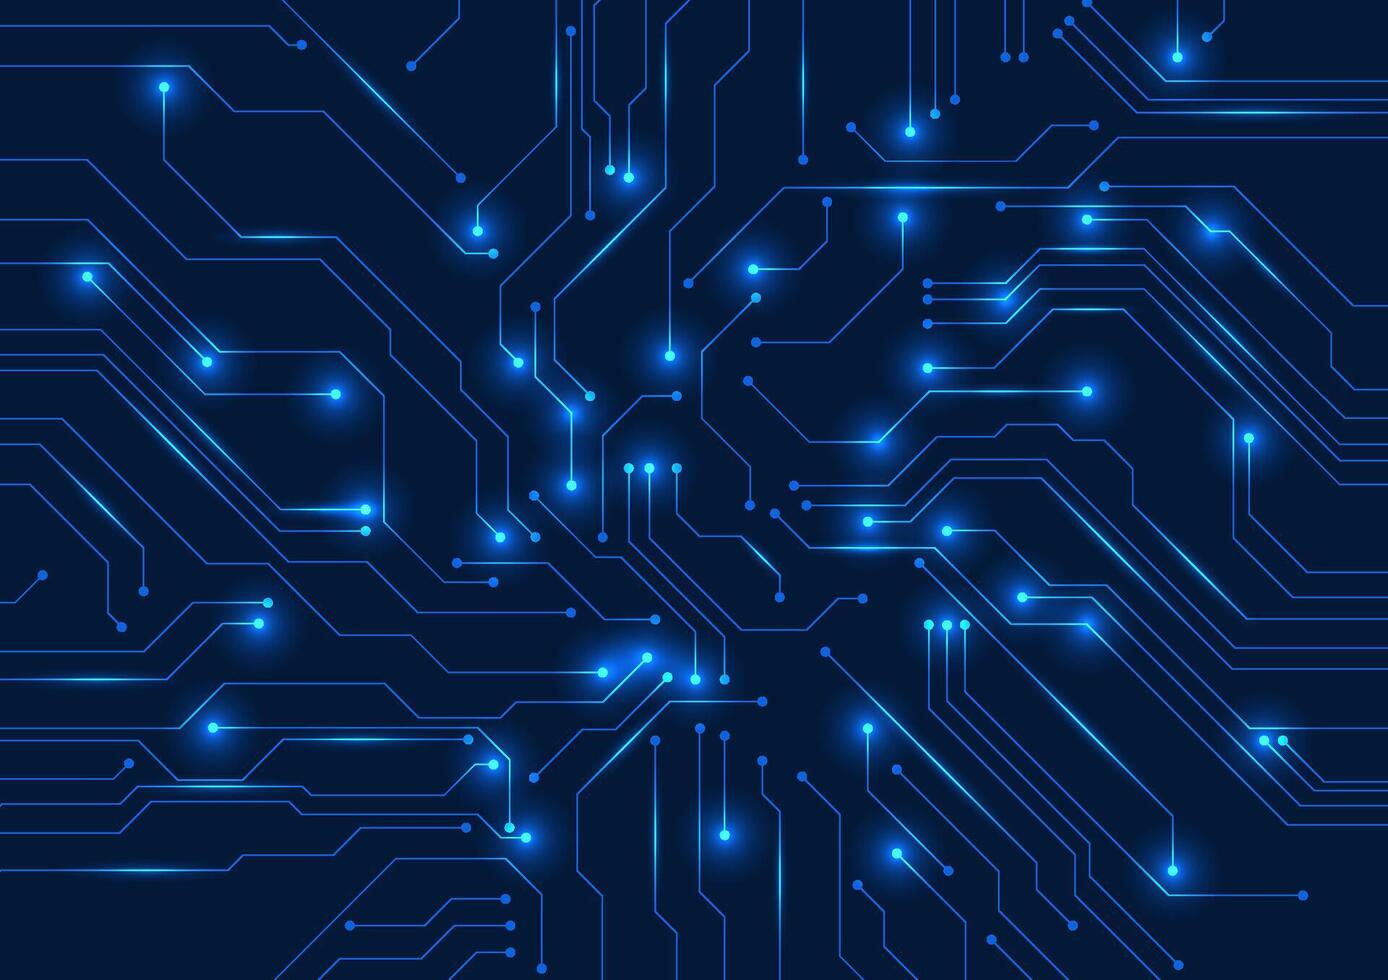 Circuit board technology background, The circuit board sends signals to the operation of electronic devices, with light. Vector illustration